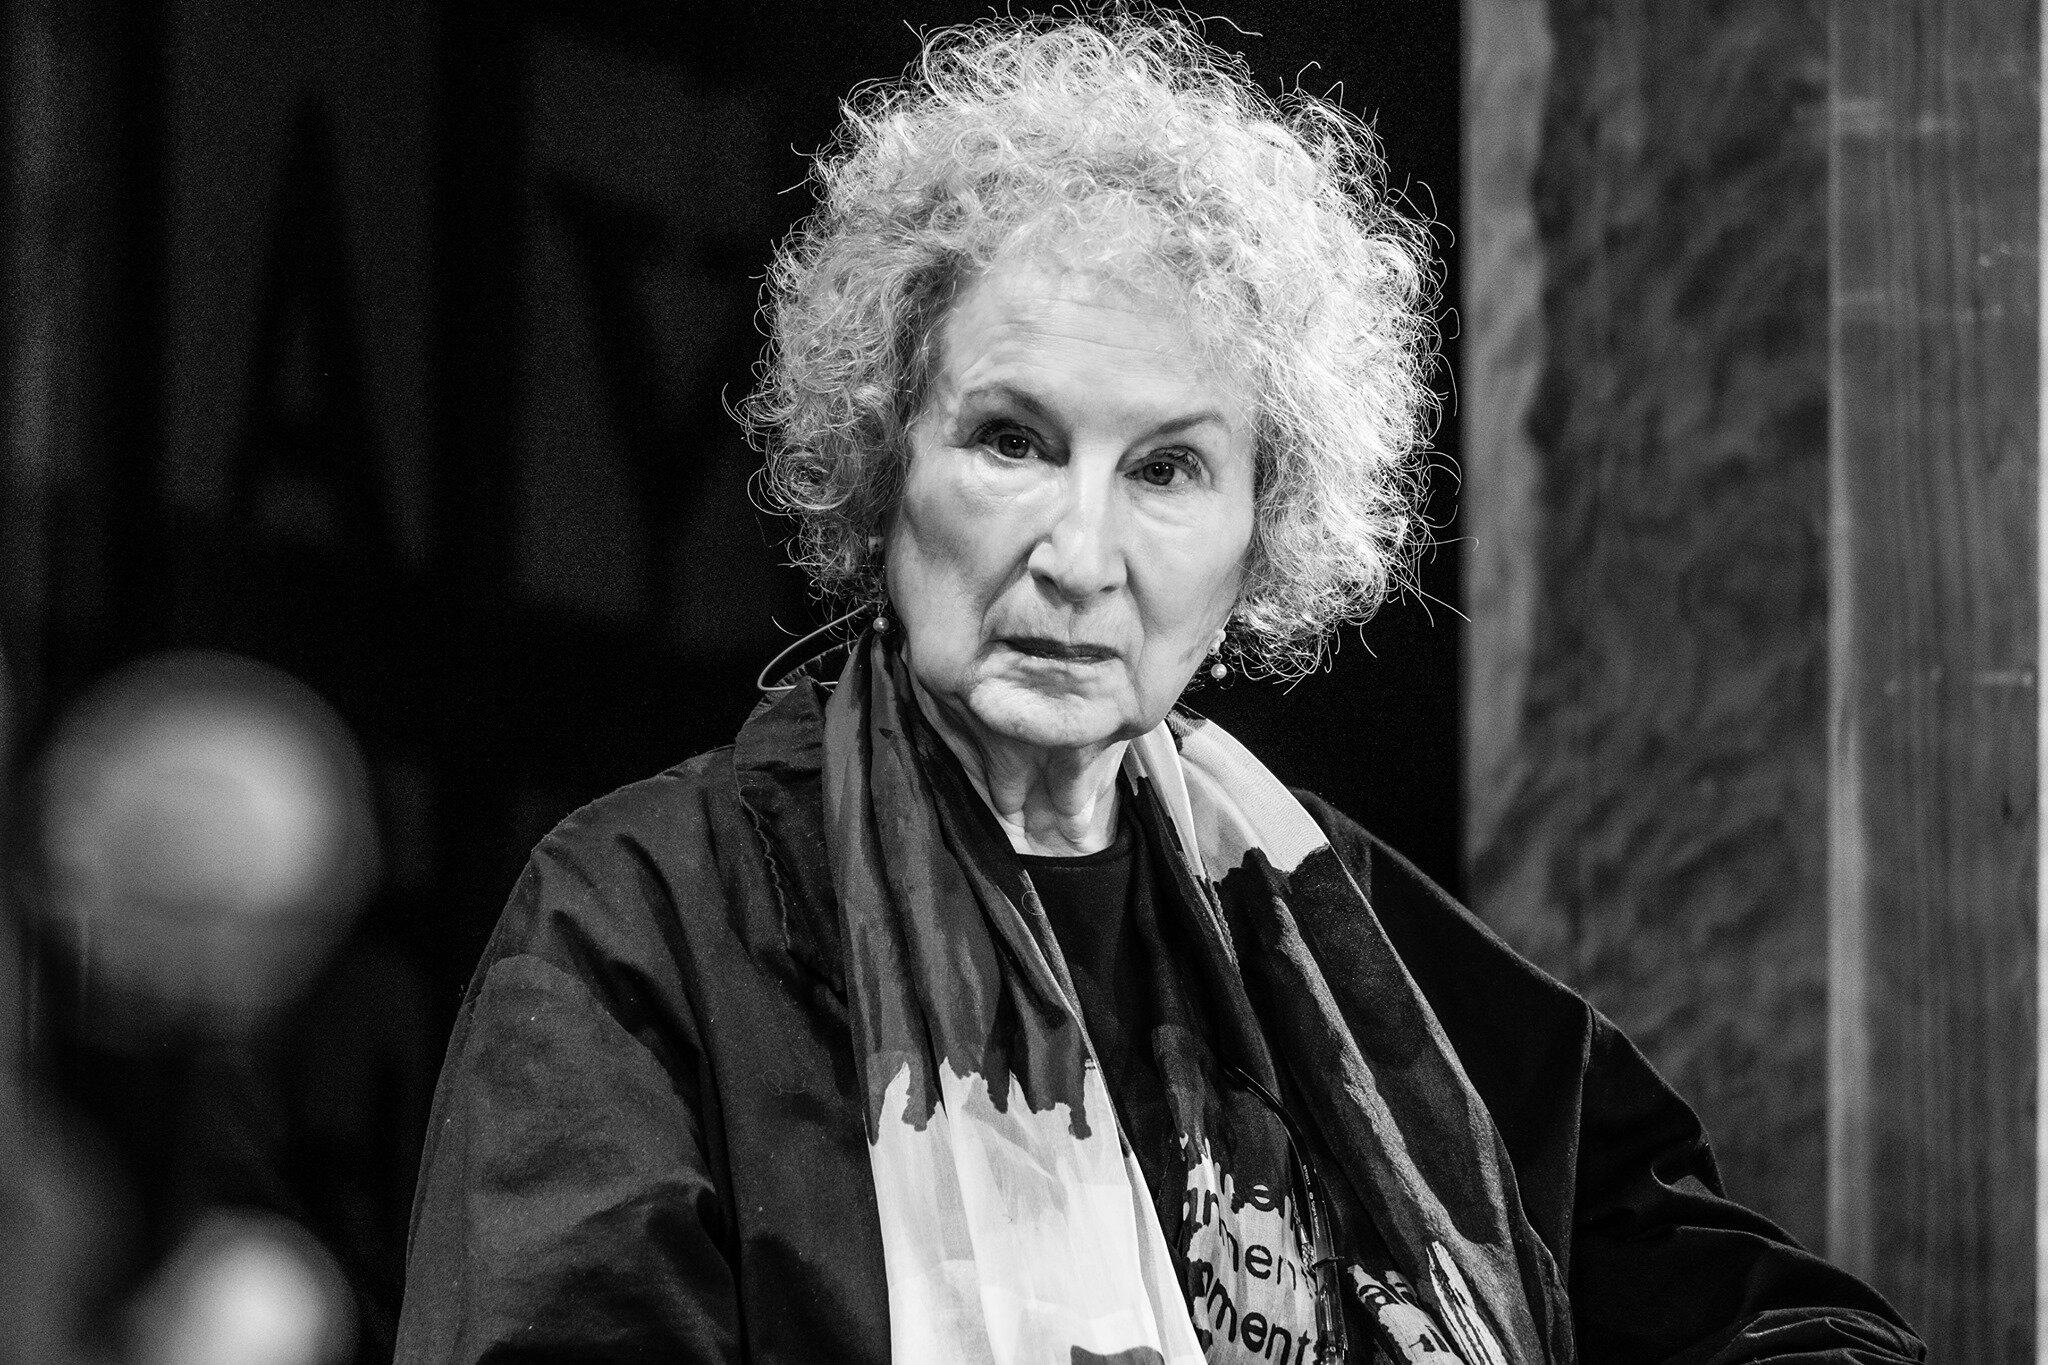 MARGARET ATWOOD, Canadian novelist, writer, commentator. Author of the dystopian classic 'The Handmad's Tale'